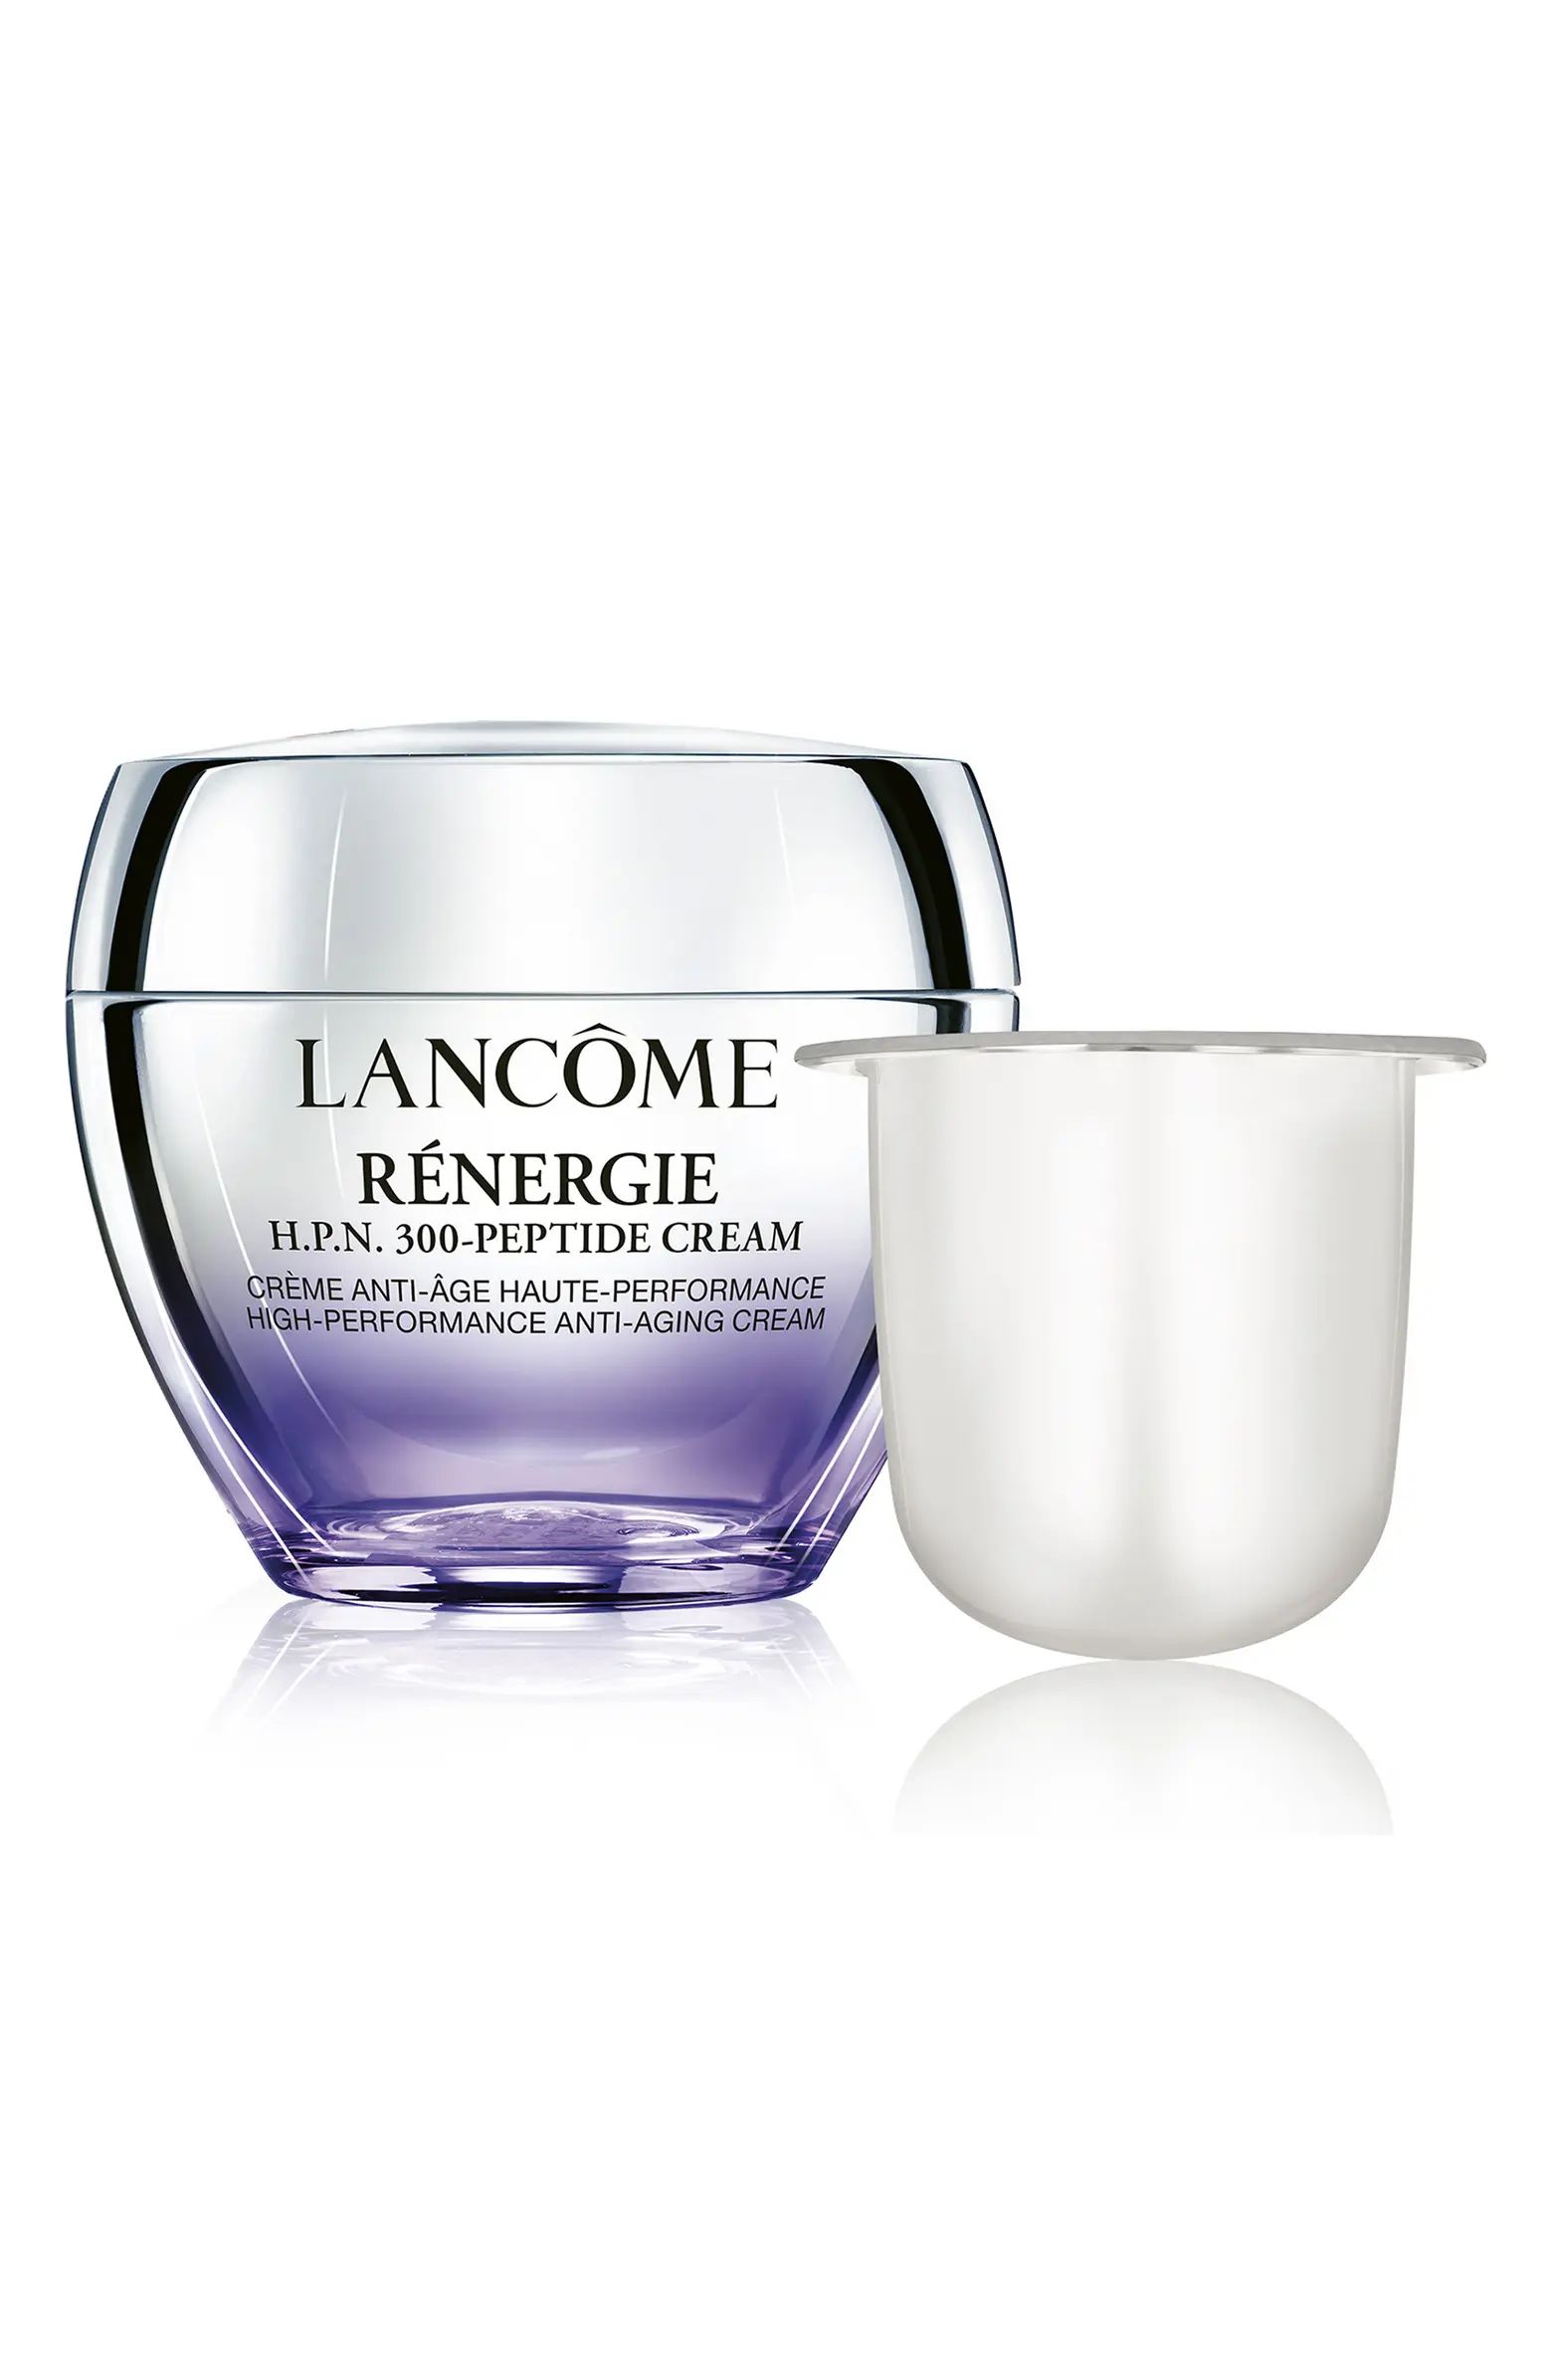 Rénergie HPN 300-Peptide Cream Refill Duo (Limited Edition) $270 Value | Nordstrom